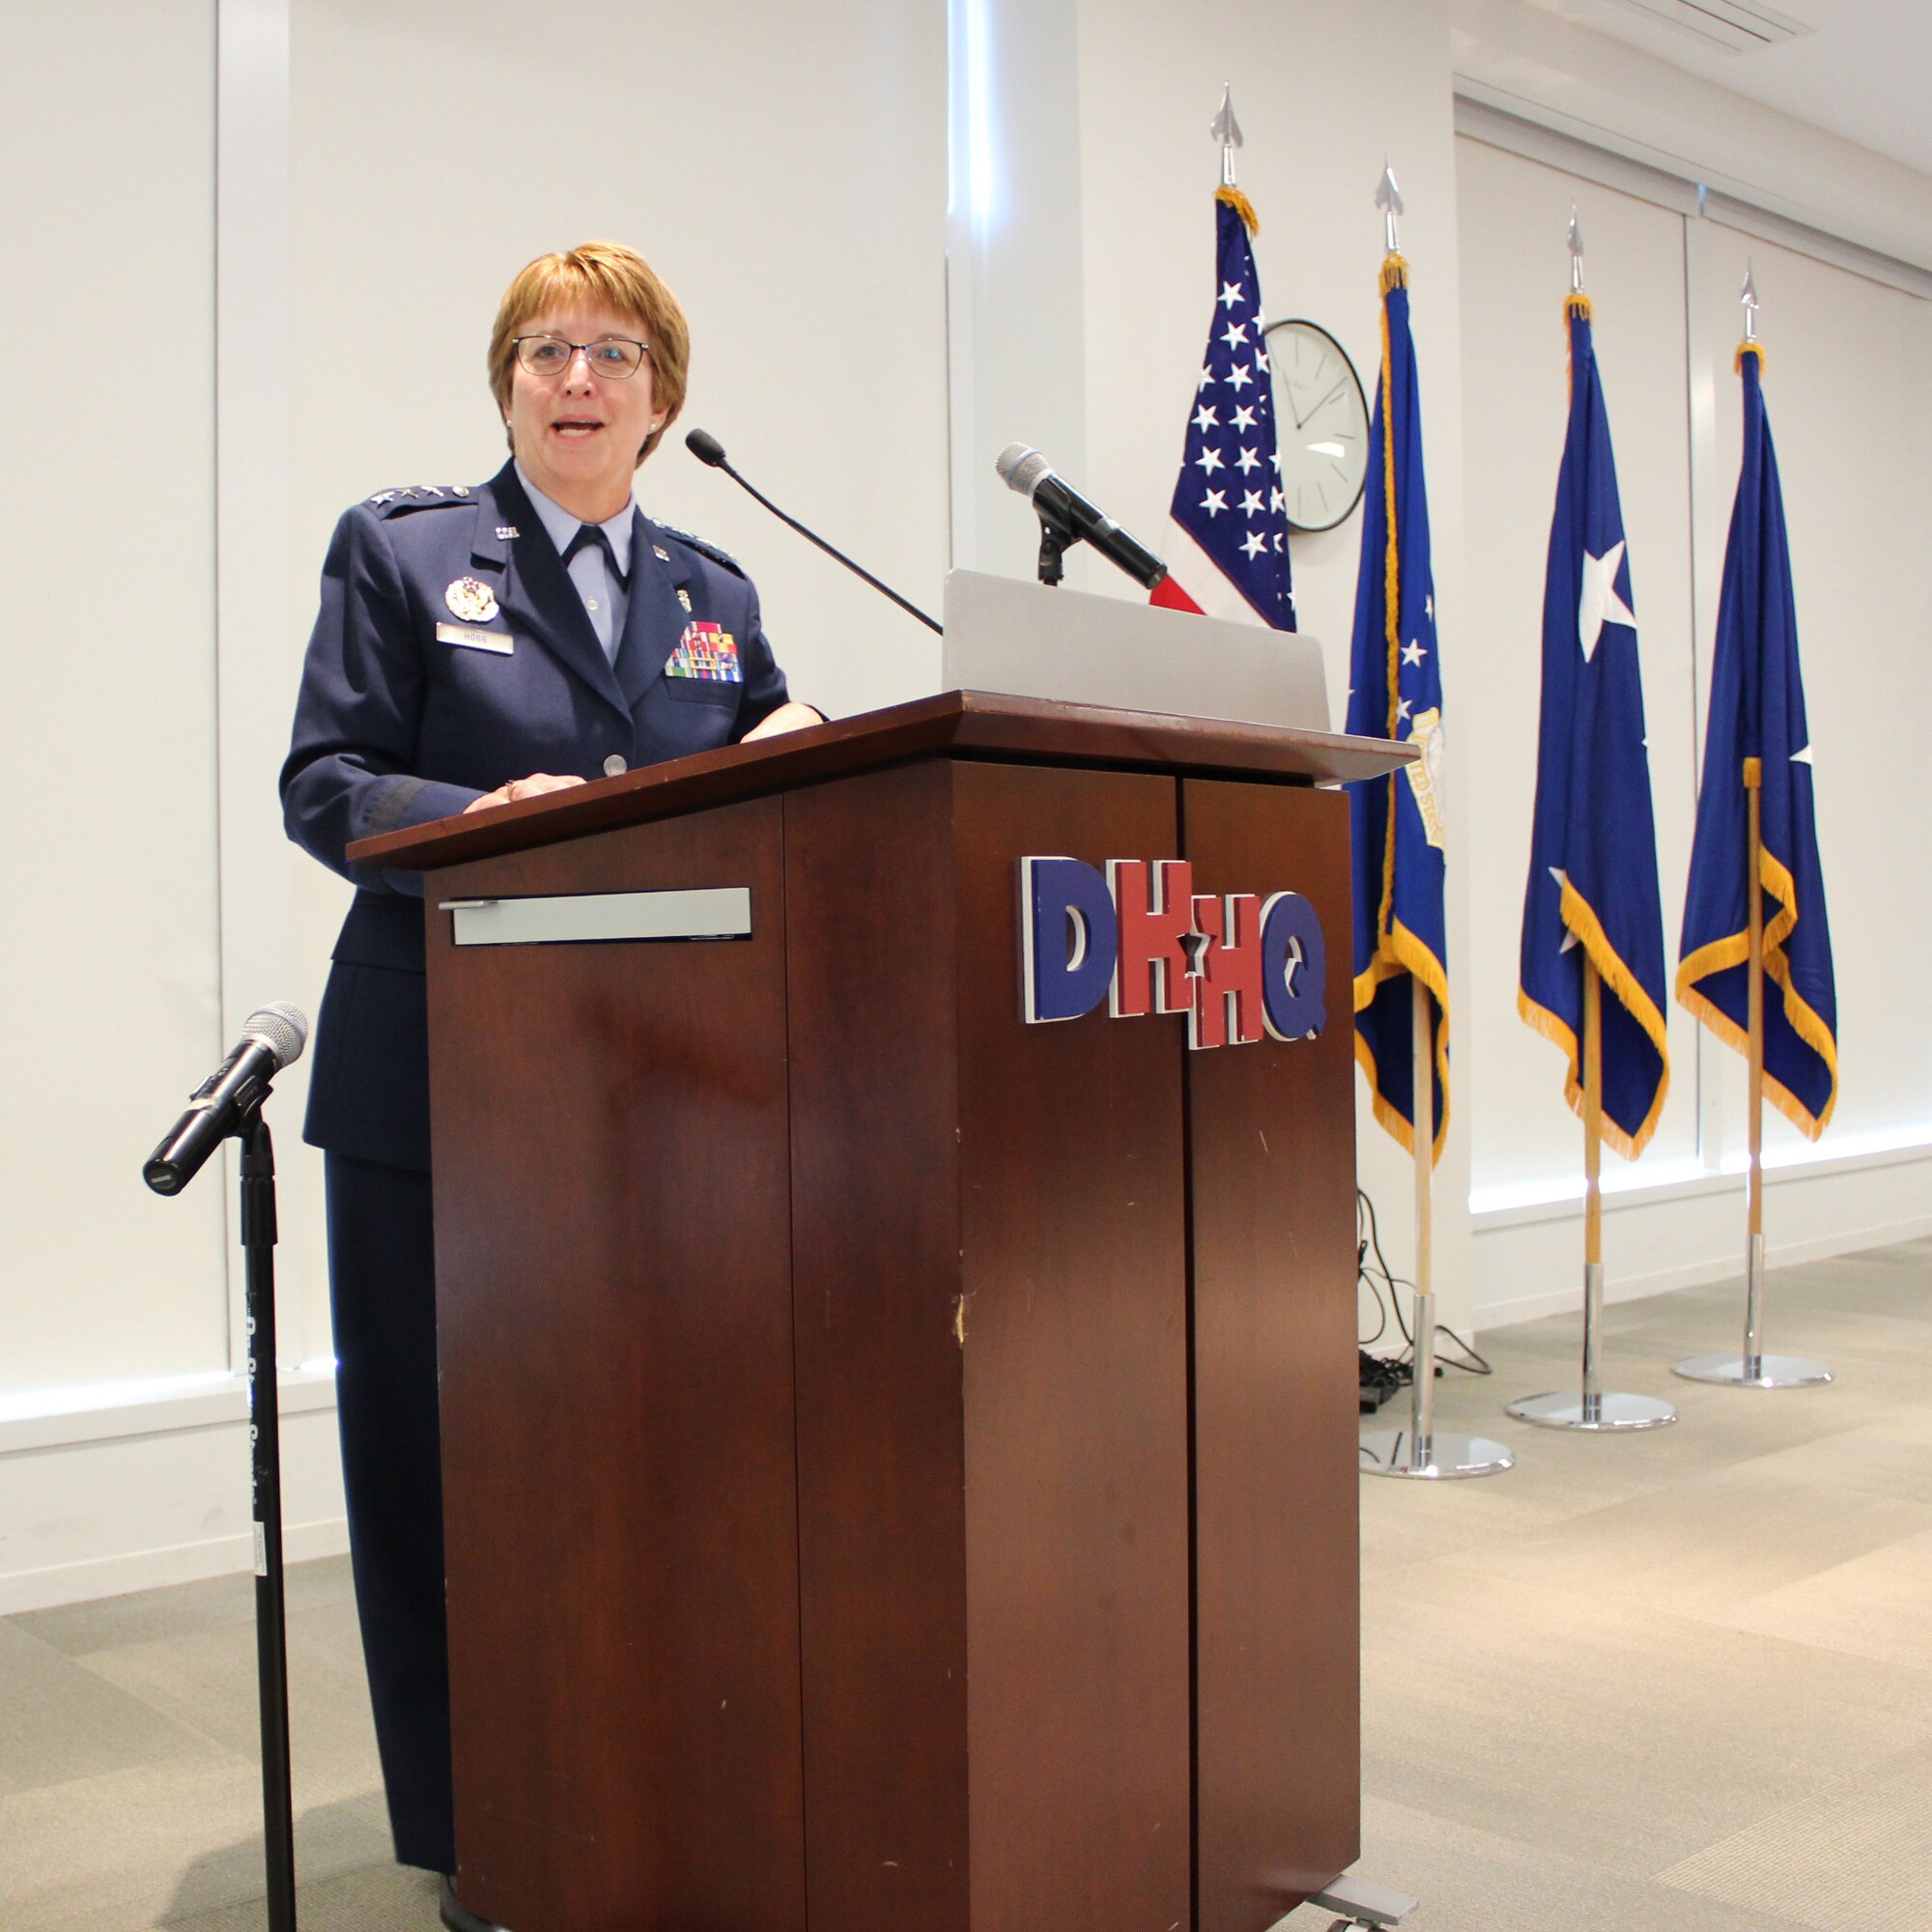 U.S. Air Force Surgeon General, Lt. Gen. Dorothy Hogg, speaks at the official activation of Air Force Medical Readiness Agency, at Defense Health Headquarters, Falls Church, Virginia, June 28, 2019. (U.S. Air Force photo by Josh Mahler)